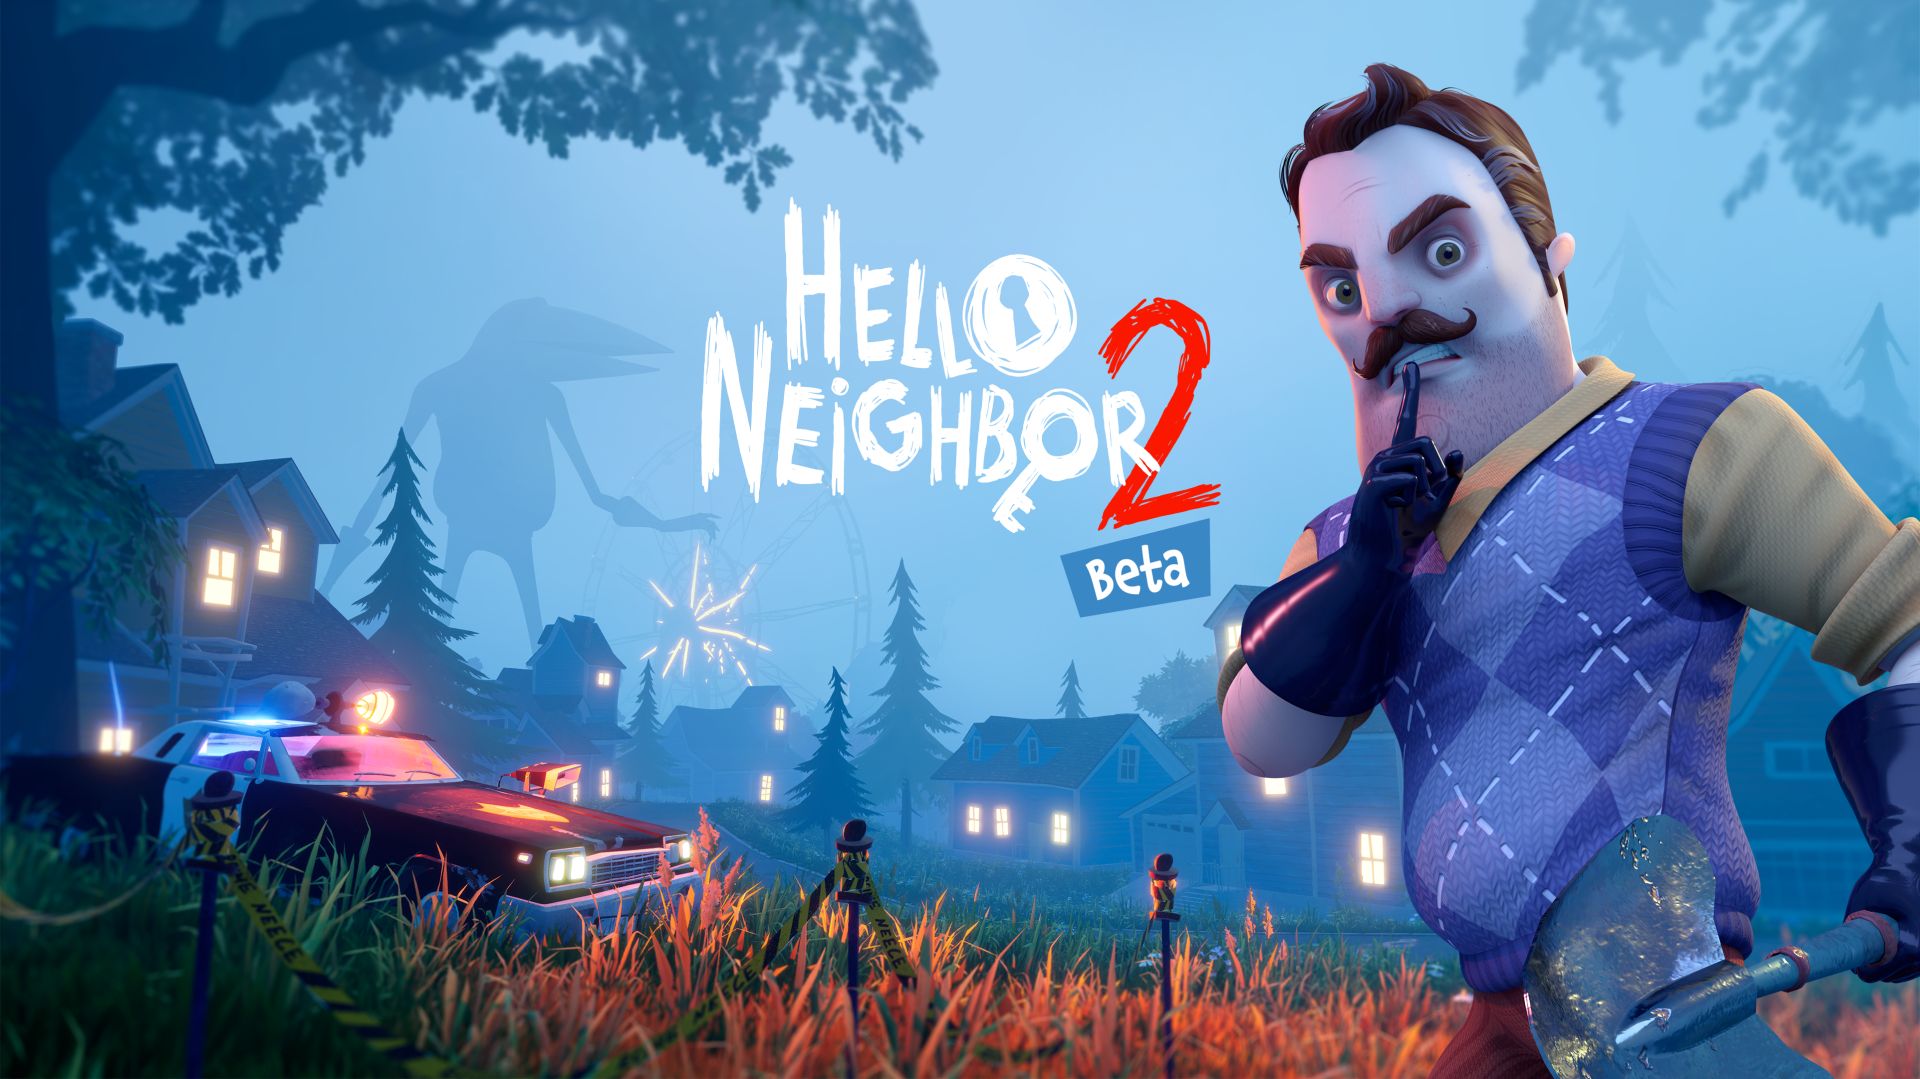 Video For Hello Neighbor 2: Pre-order and Beta Now Available